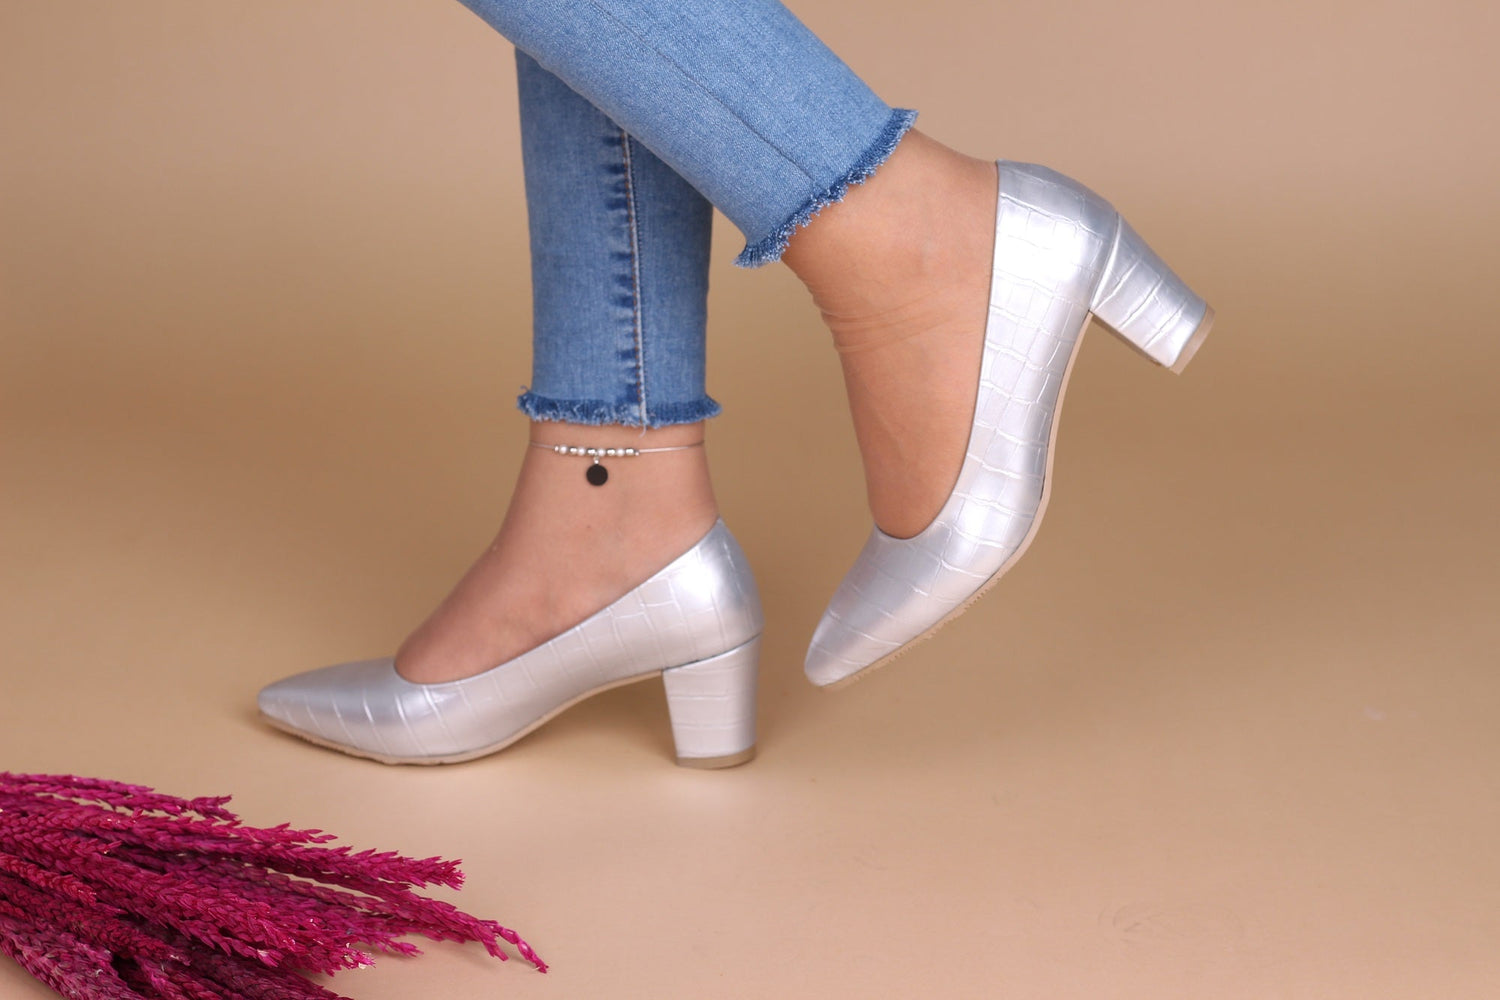 Women Heels Shoes 5 cm height. made from faux leather for your. Shoppingooo heels shoes made for your comfortable and elegancy